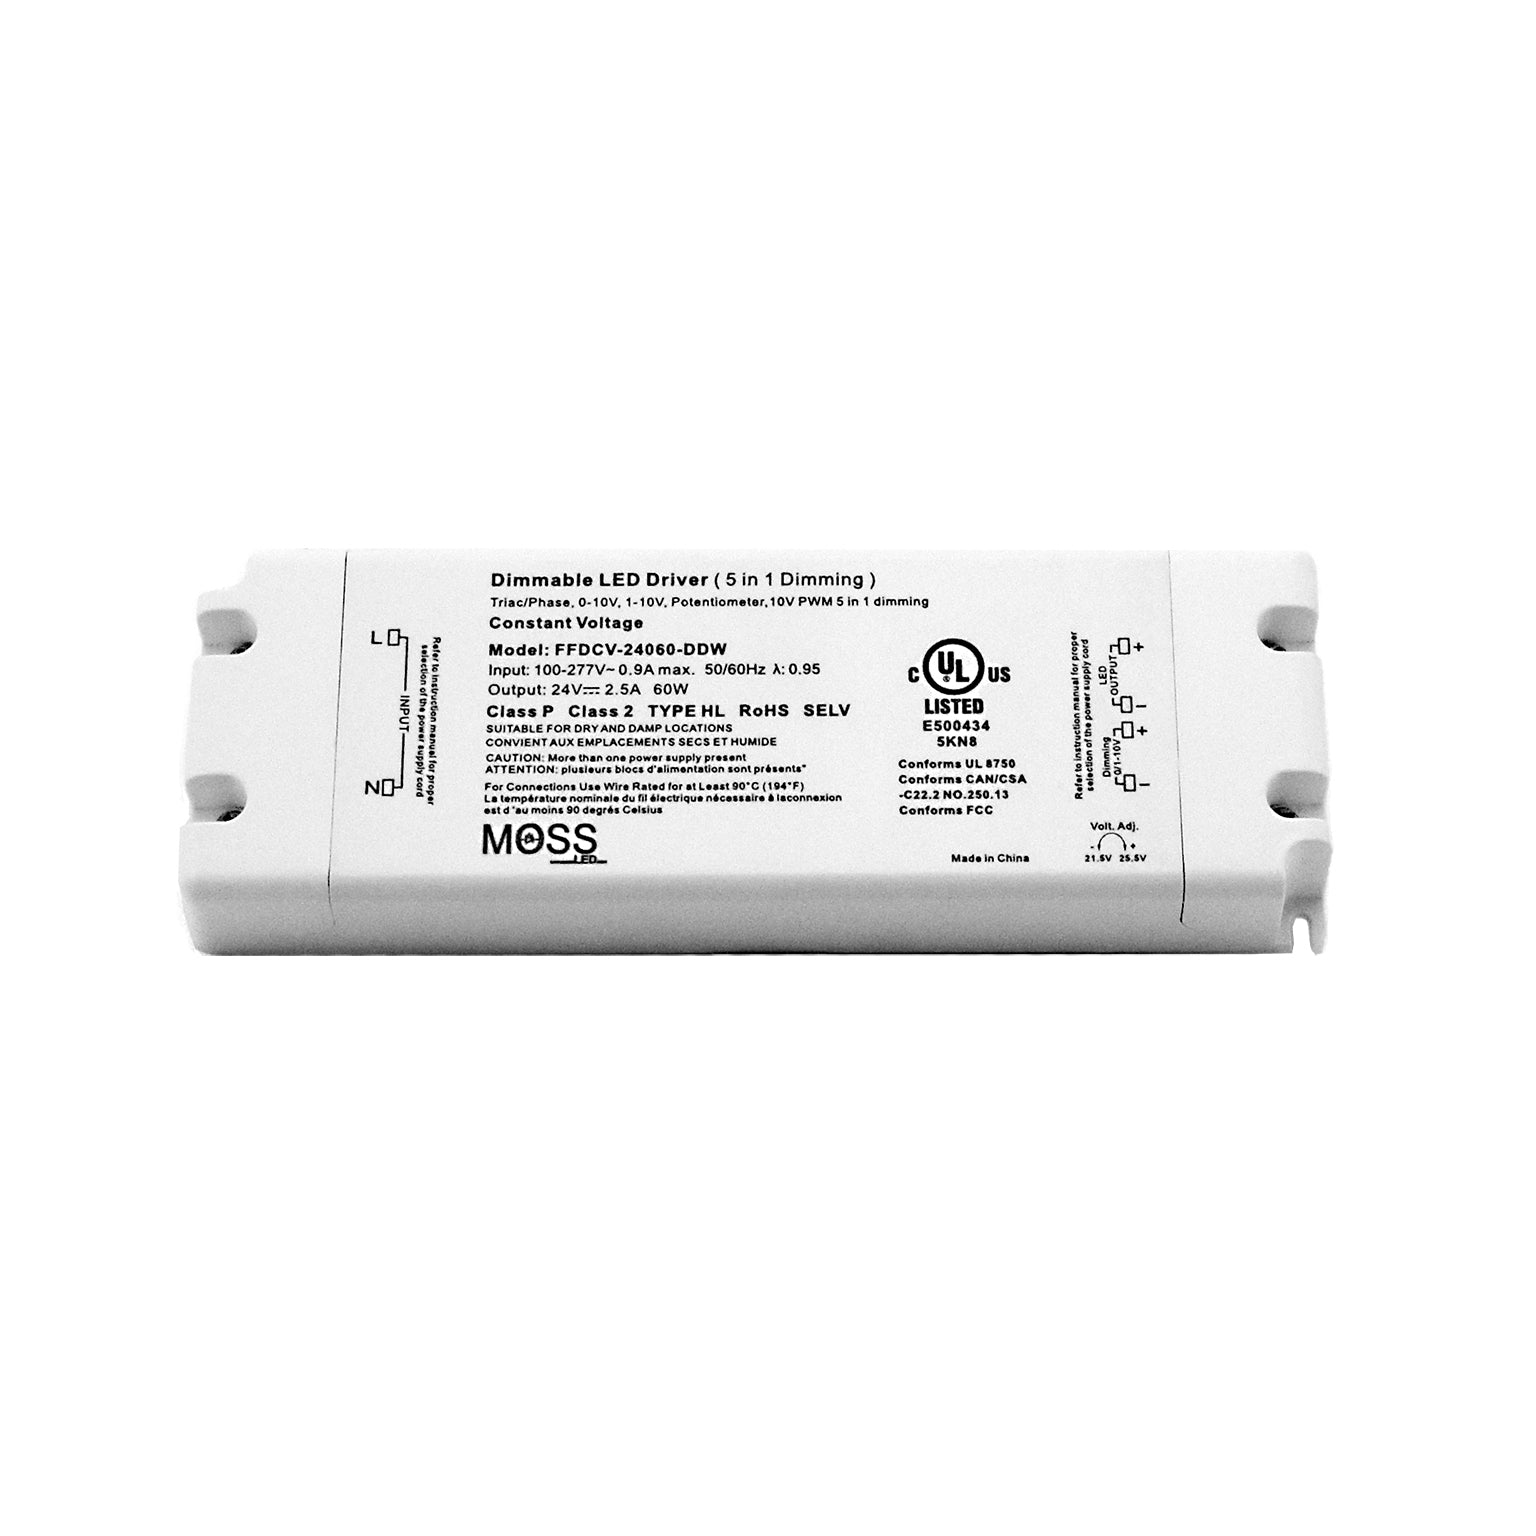 Flicker-Free Dimmable Fanless LED Drivers